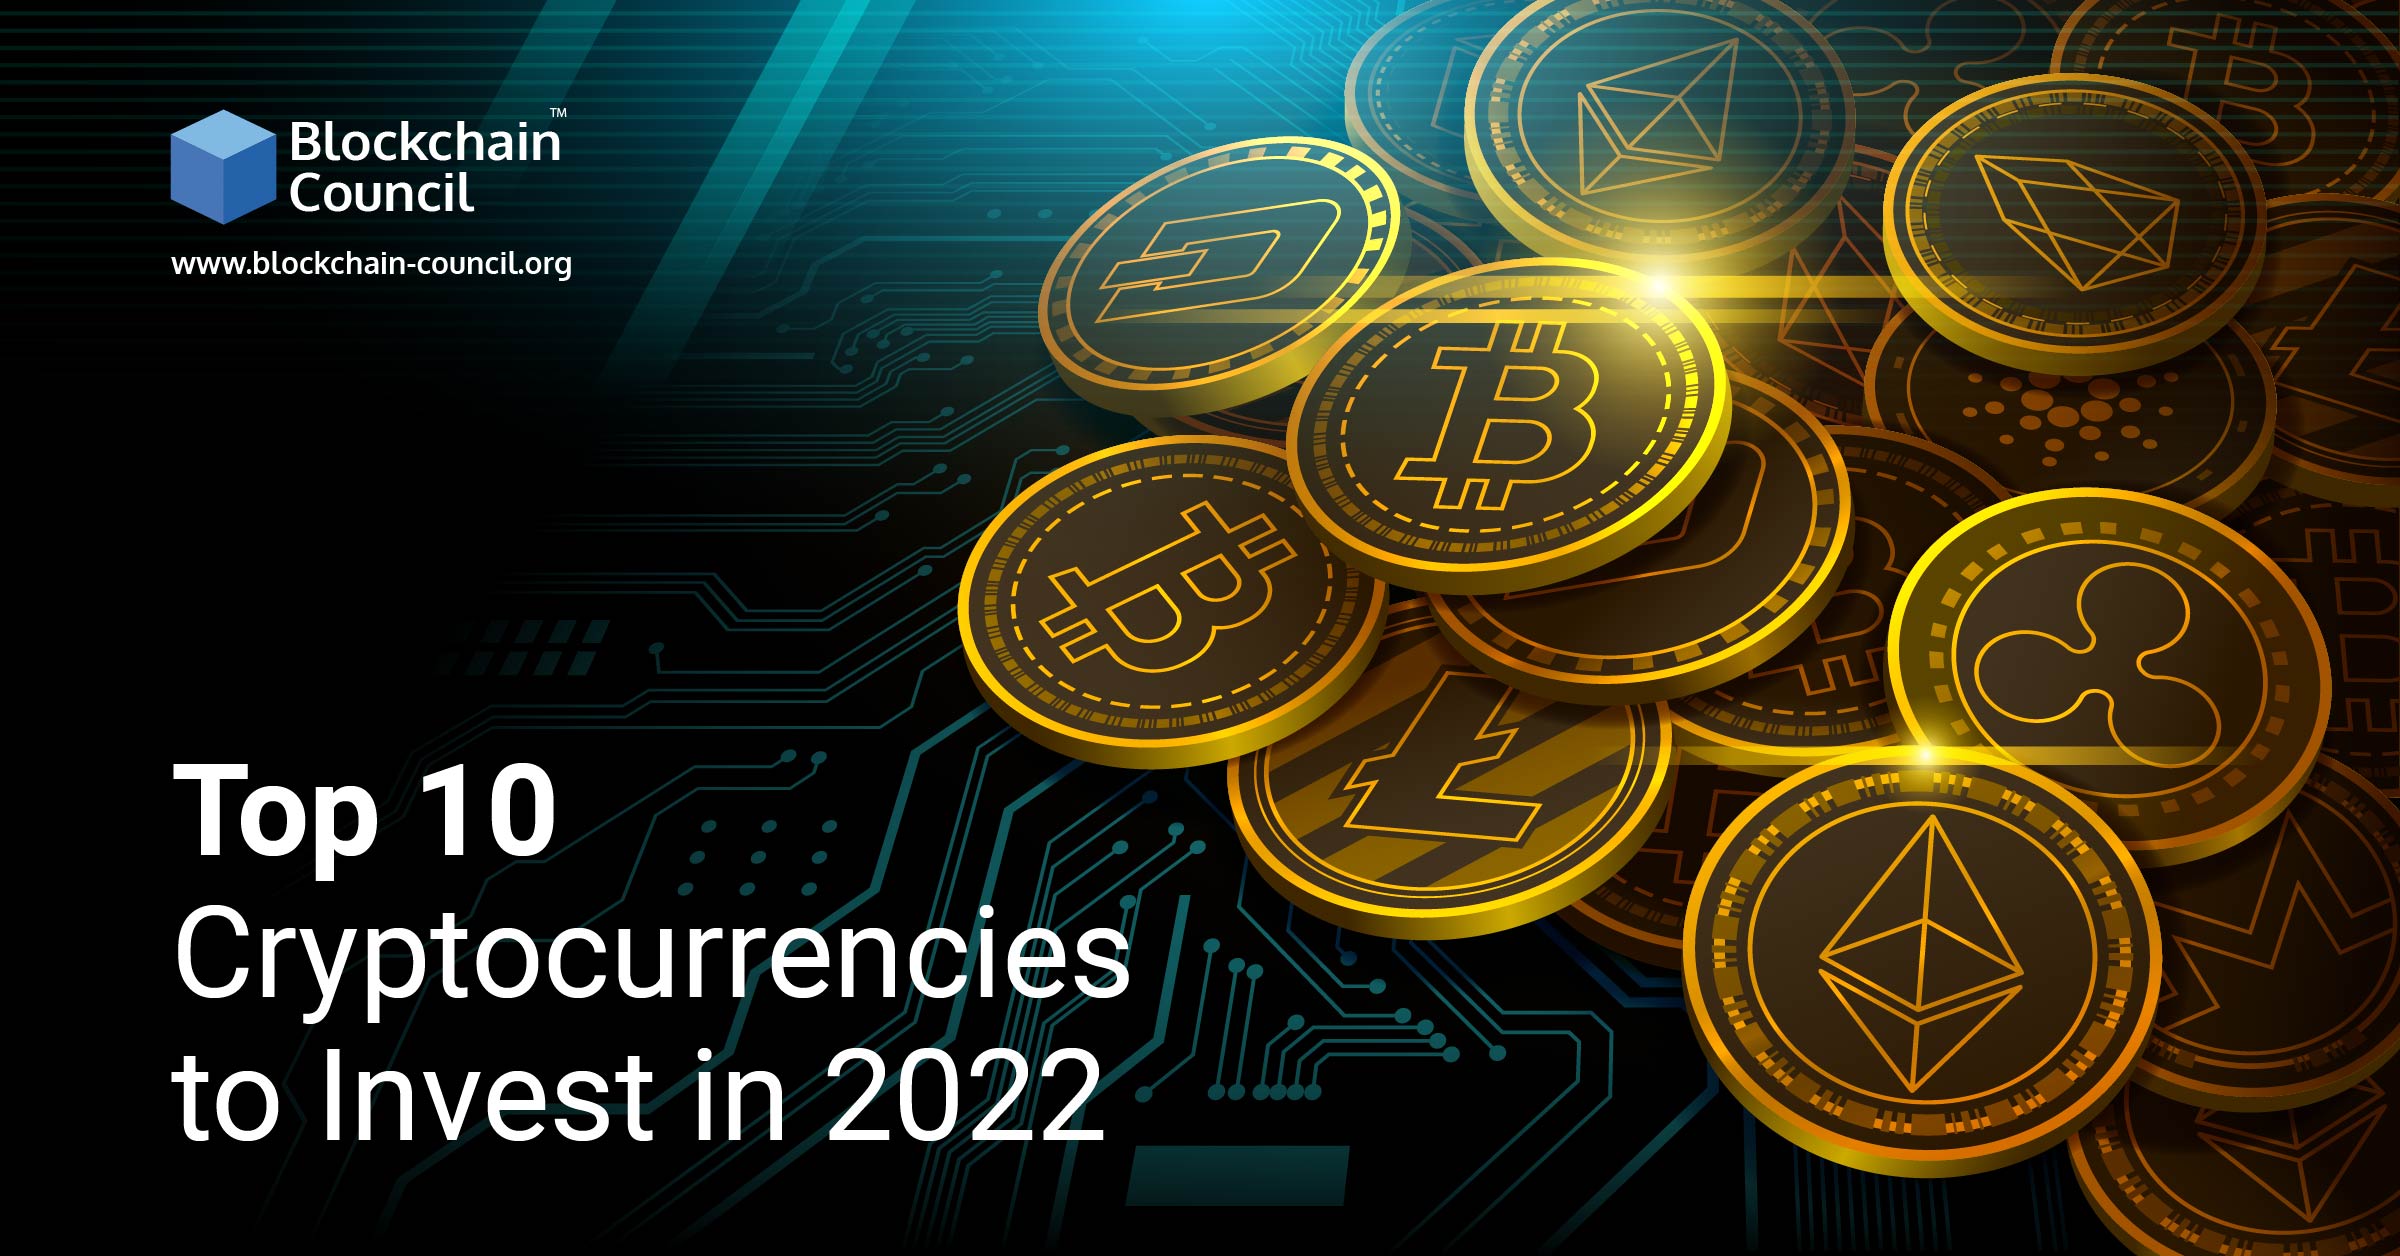 Top cryptocurrency prospects bitcoin price target 2018